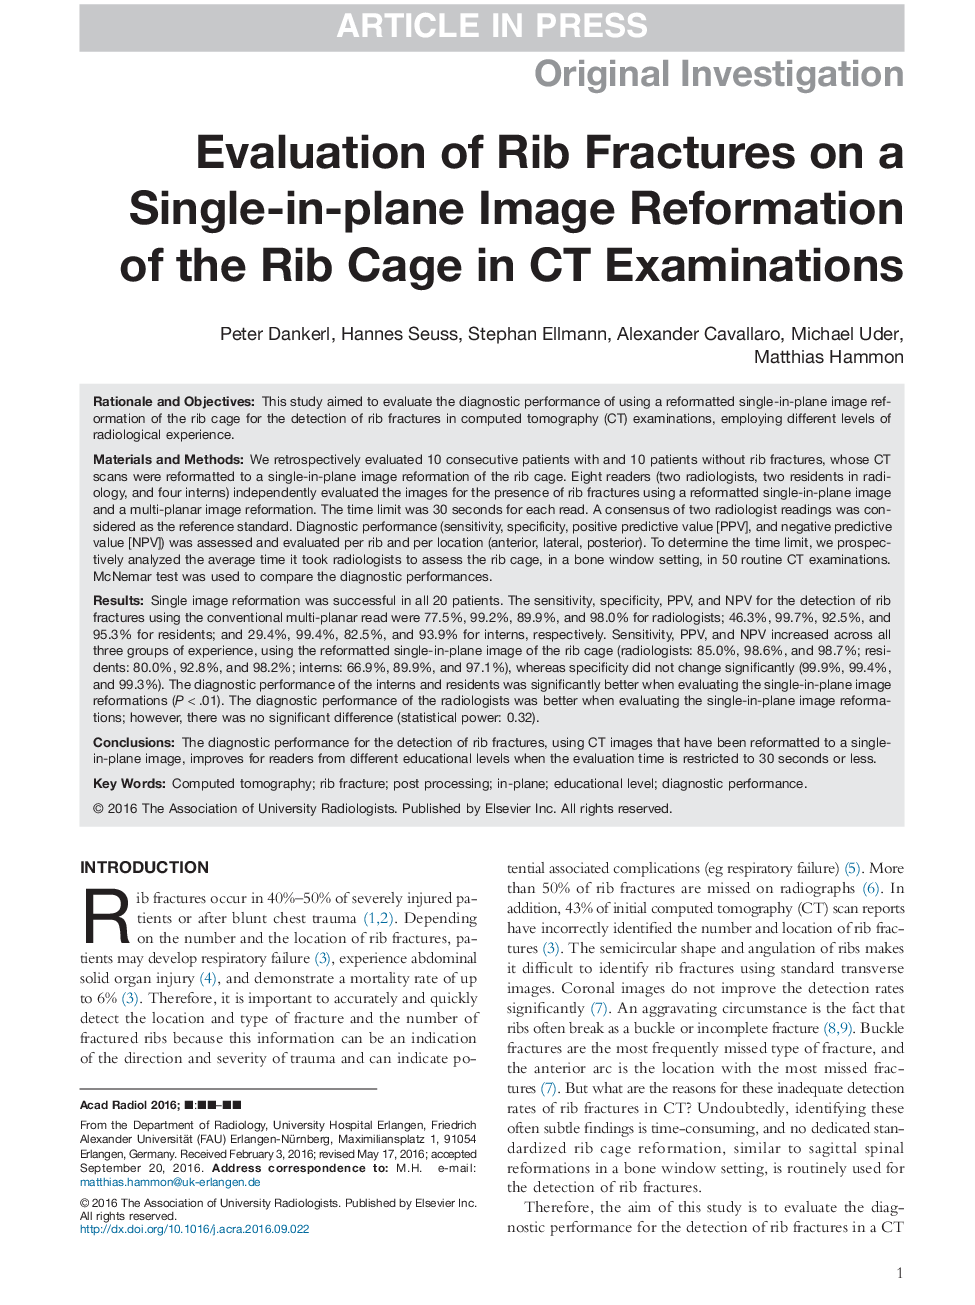 Evaluation of Rib Fractures on a Single-in-plane Image Reformation of the Rib Cage in CT Examinations